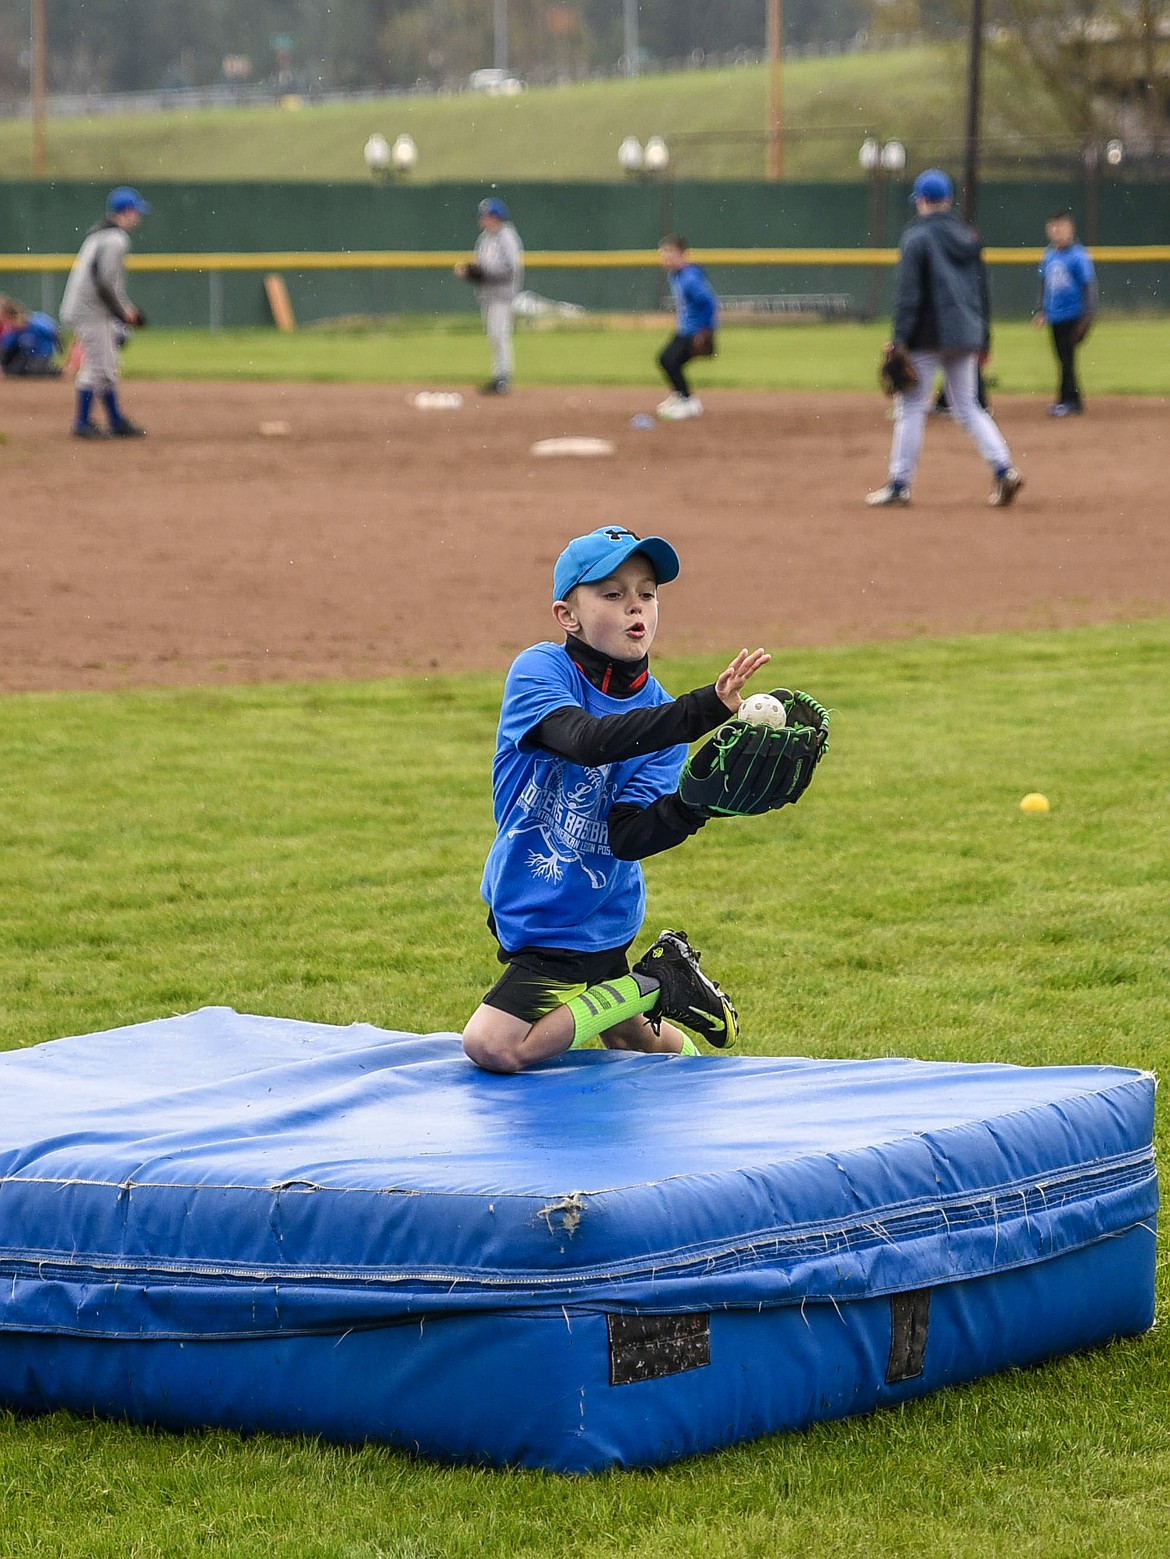 Hudson Hannah practices diving for a catch at the Libby Loggers Kids Camp Saturday at Lee Gehring Field. (Ben Kibbey/The Western News)